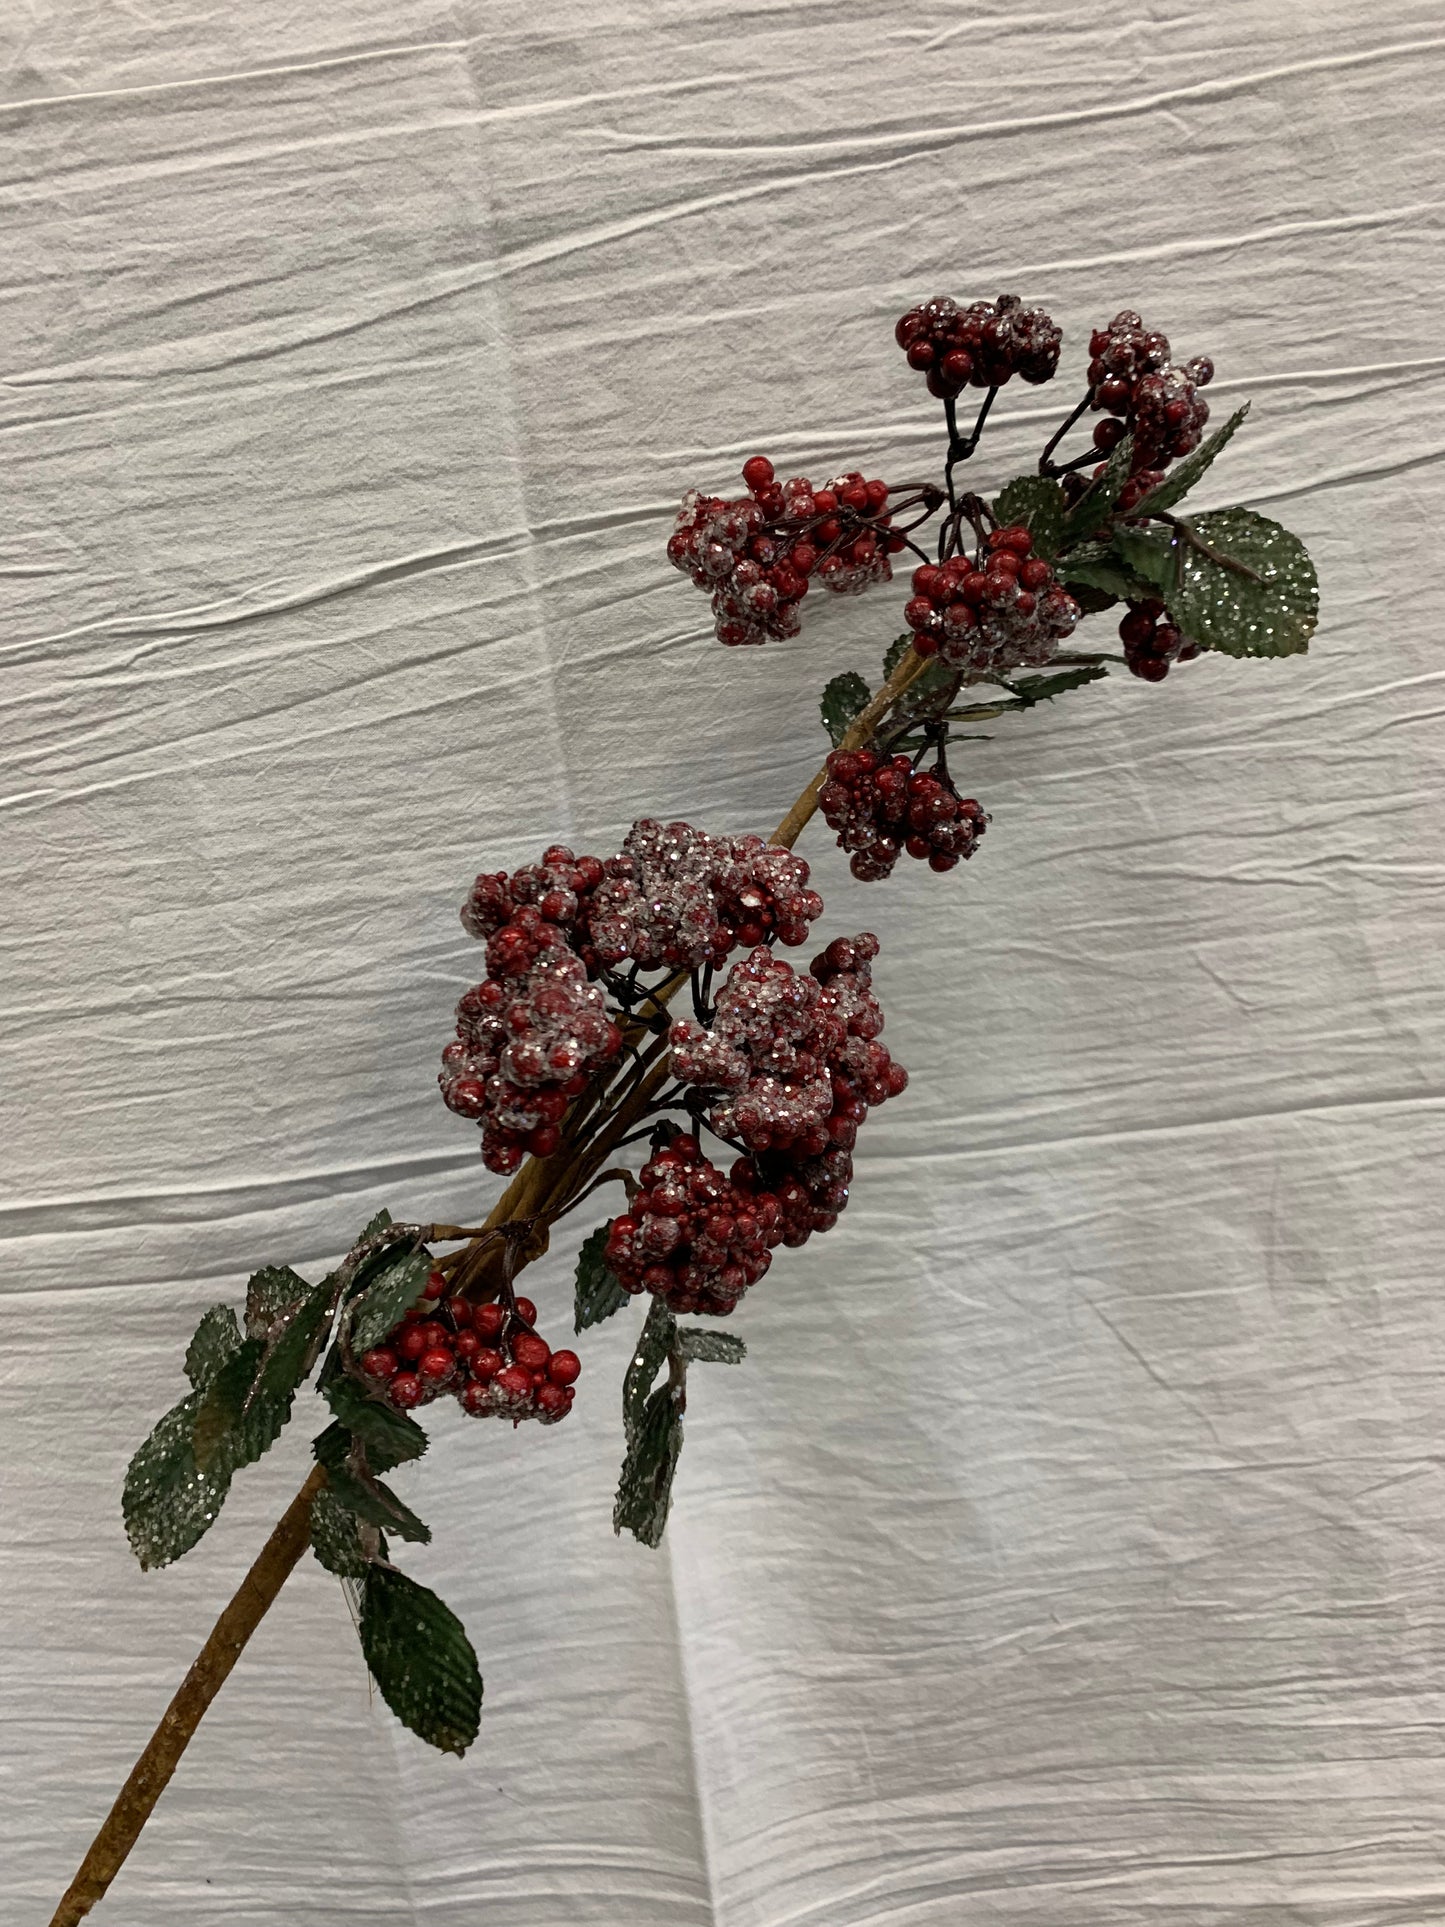 Iced Glit Cluster Berries, Red